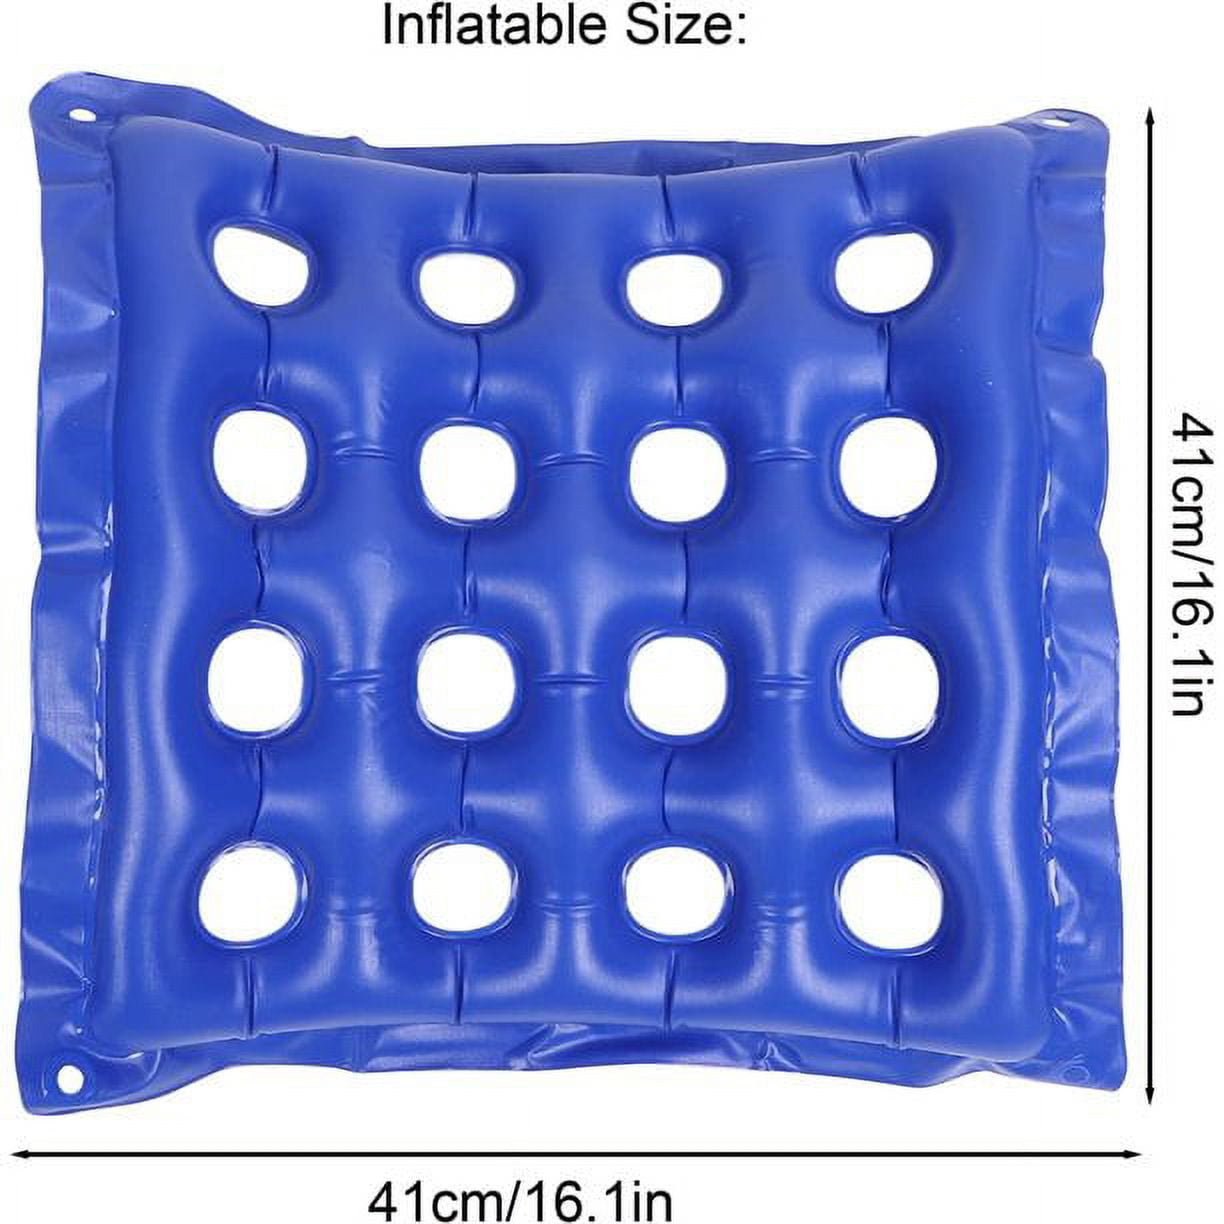 TURNSOLE Waffle Cushion for Pressure Sores Chair - Inflatable Seat Cushion  for Wheelchair - Wheelchair Cushions for Pressure Relief